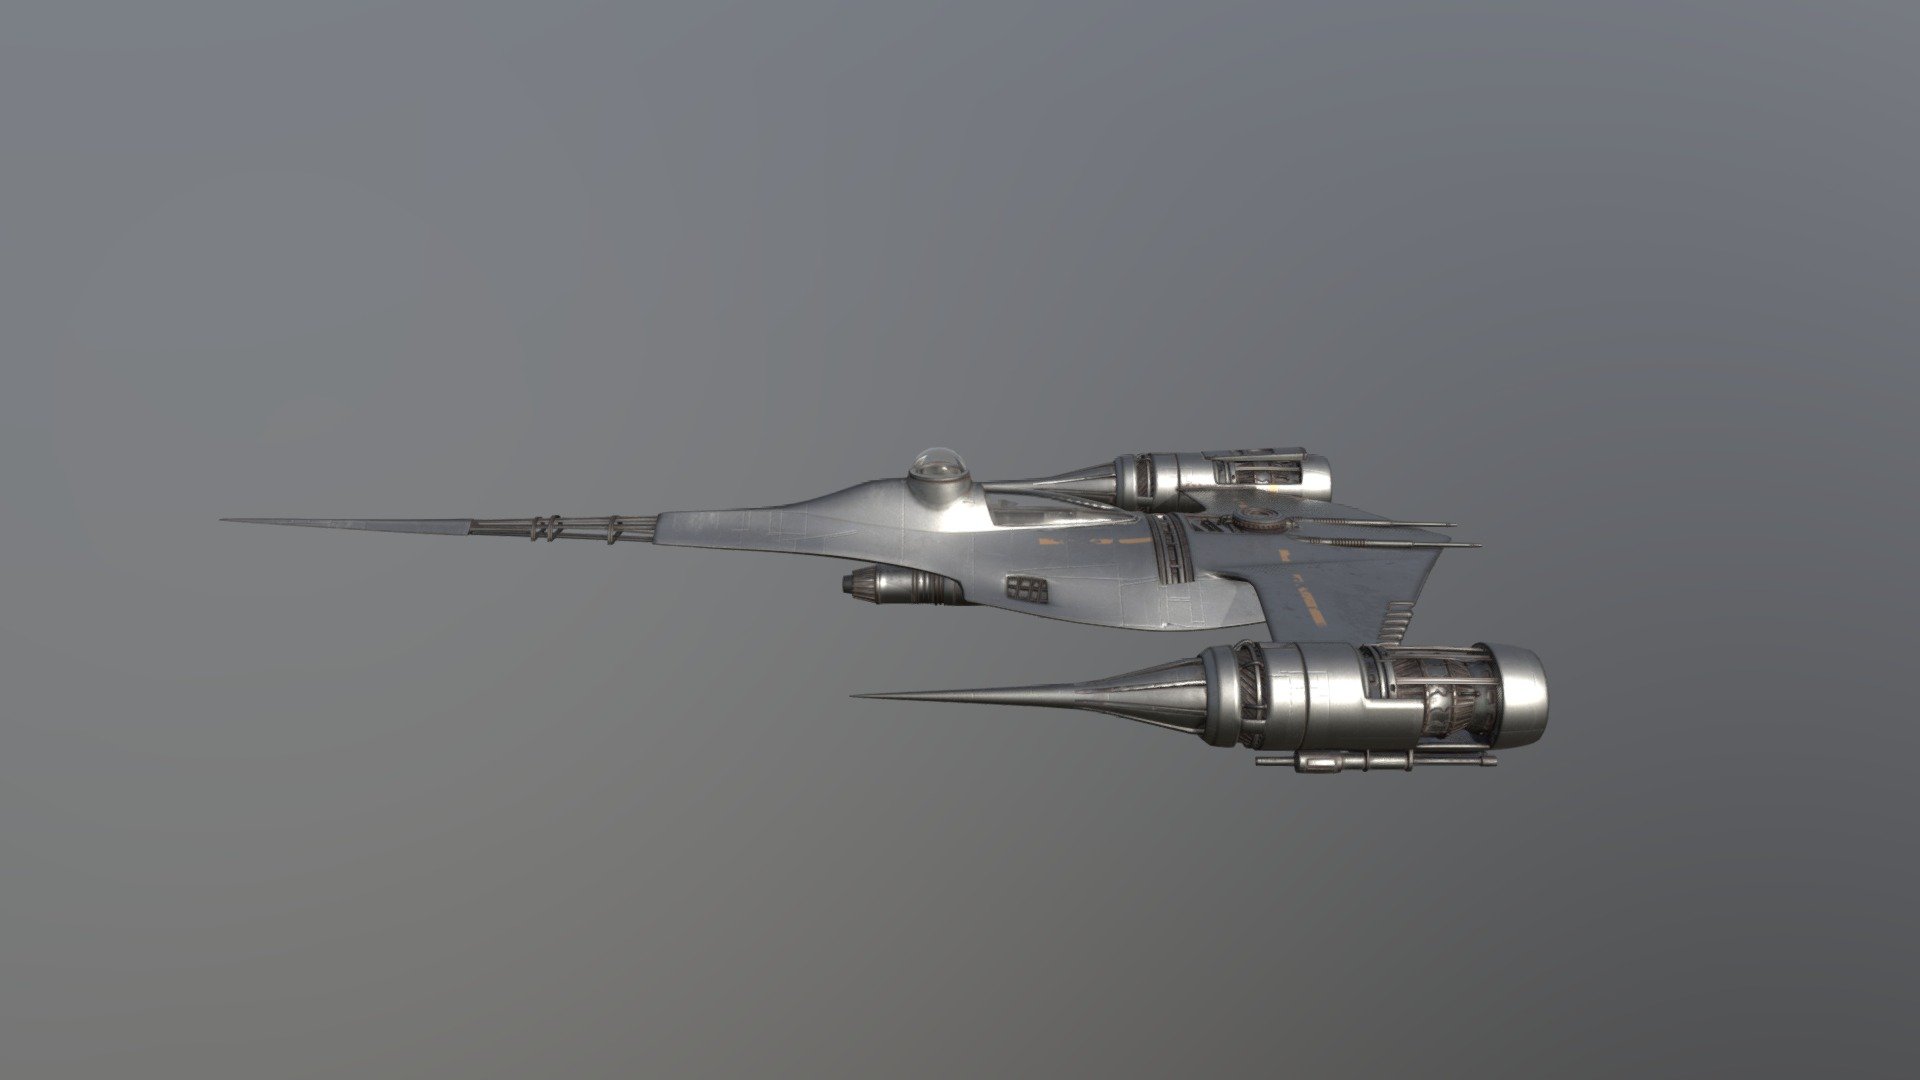 This is the Mandalorian N1 Naboo Starfighter. Modeled and textured by me in Blender. This model has a detailed interior and exterior perfect for animation in games or other media. Enjoy!

(Please do not forget to give credit if you use this in a public project/media) - Mandalorian N1 Naboo Starfighter (With Interior) - Download Free 3D model by ThumbsUp7Up (@masterbuilderandrew1234) 3d model